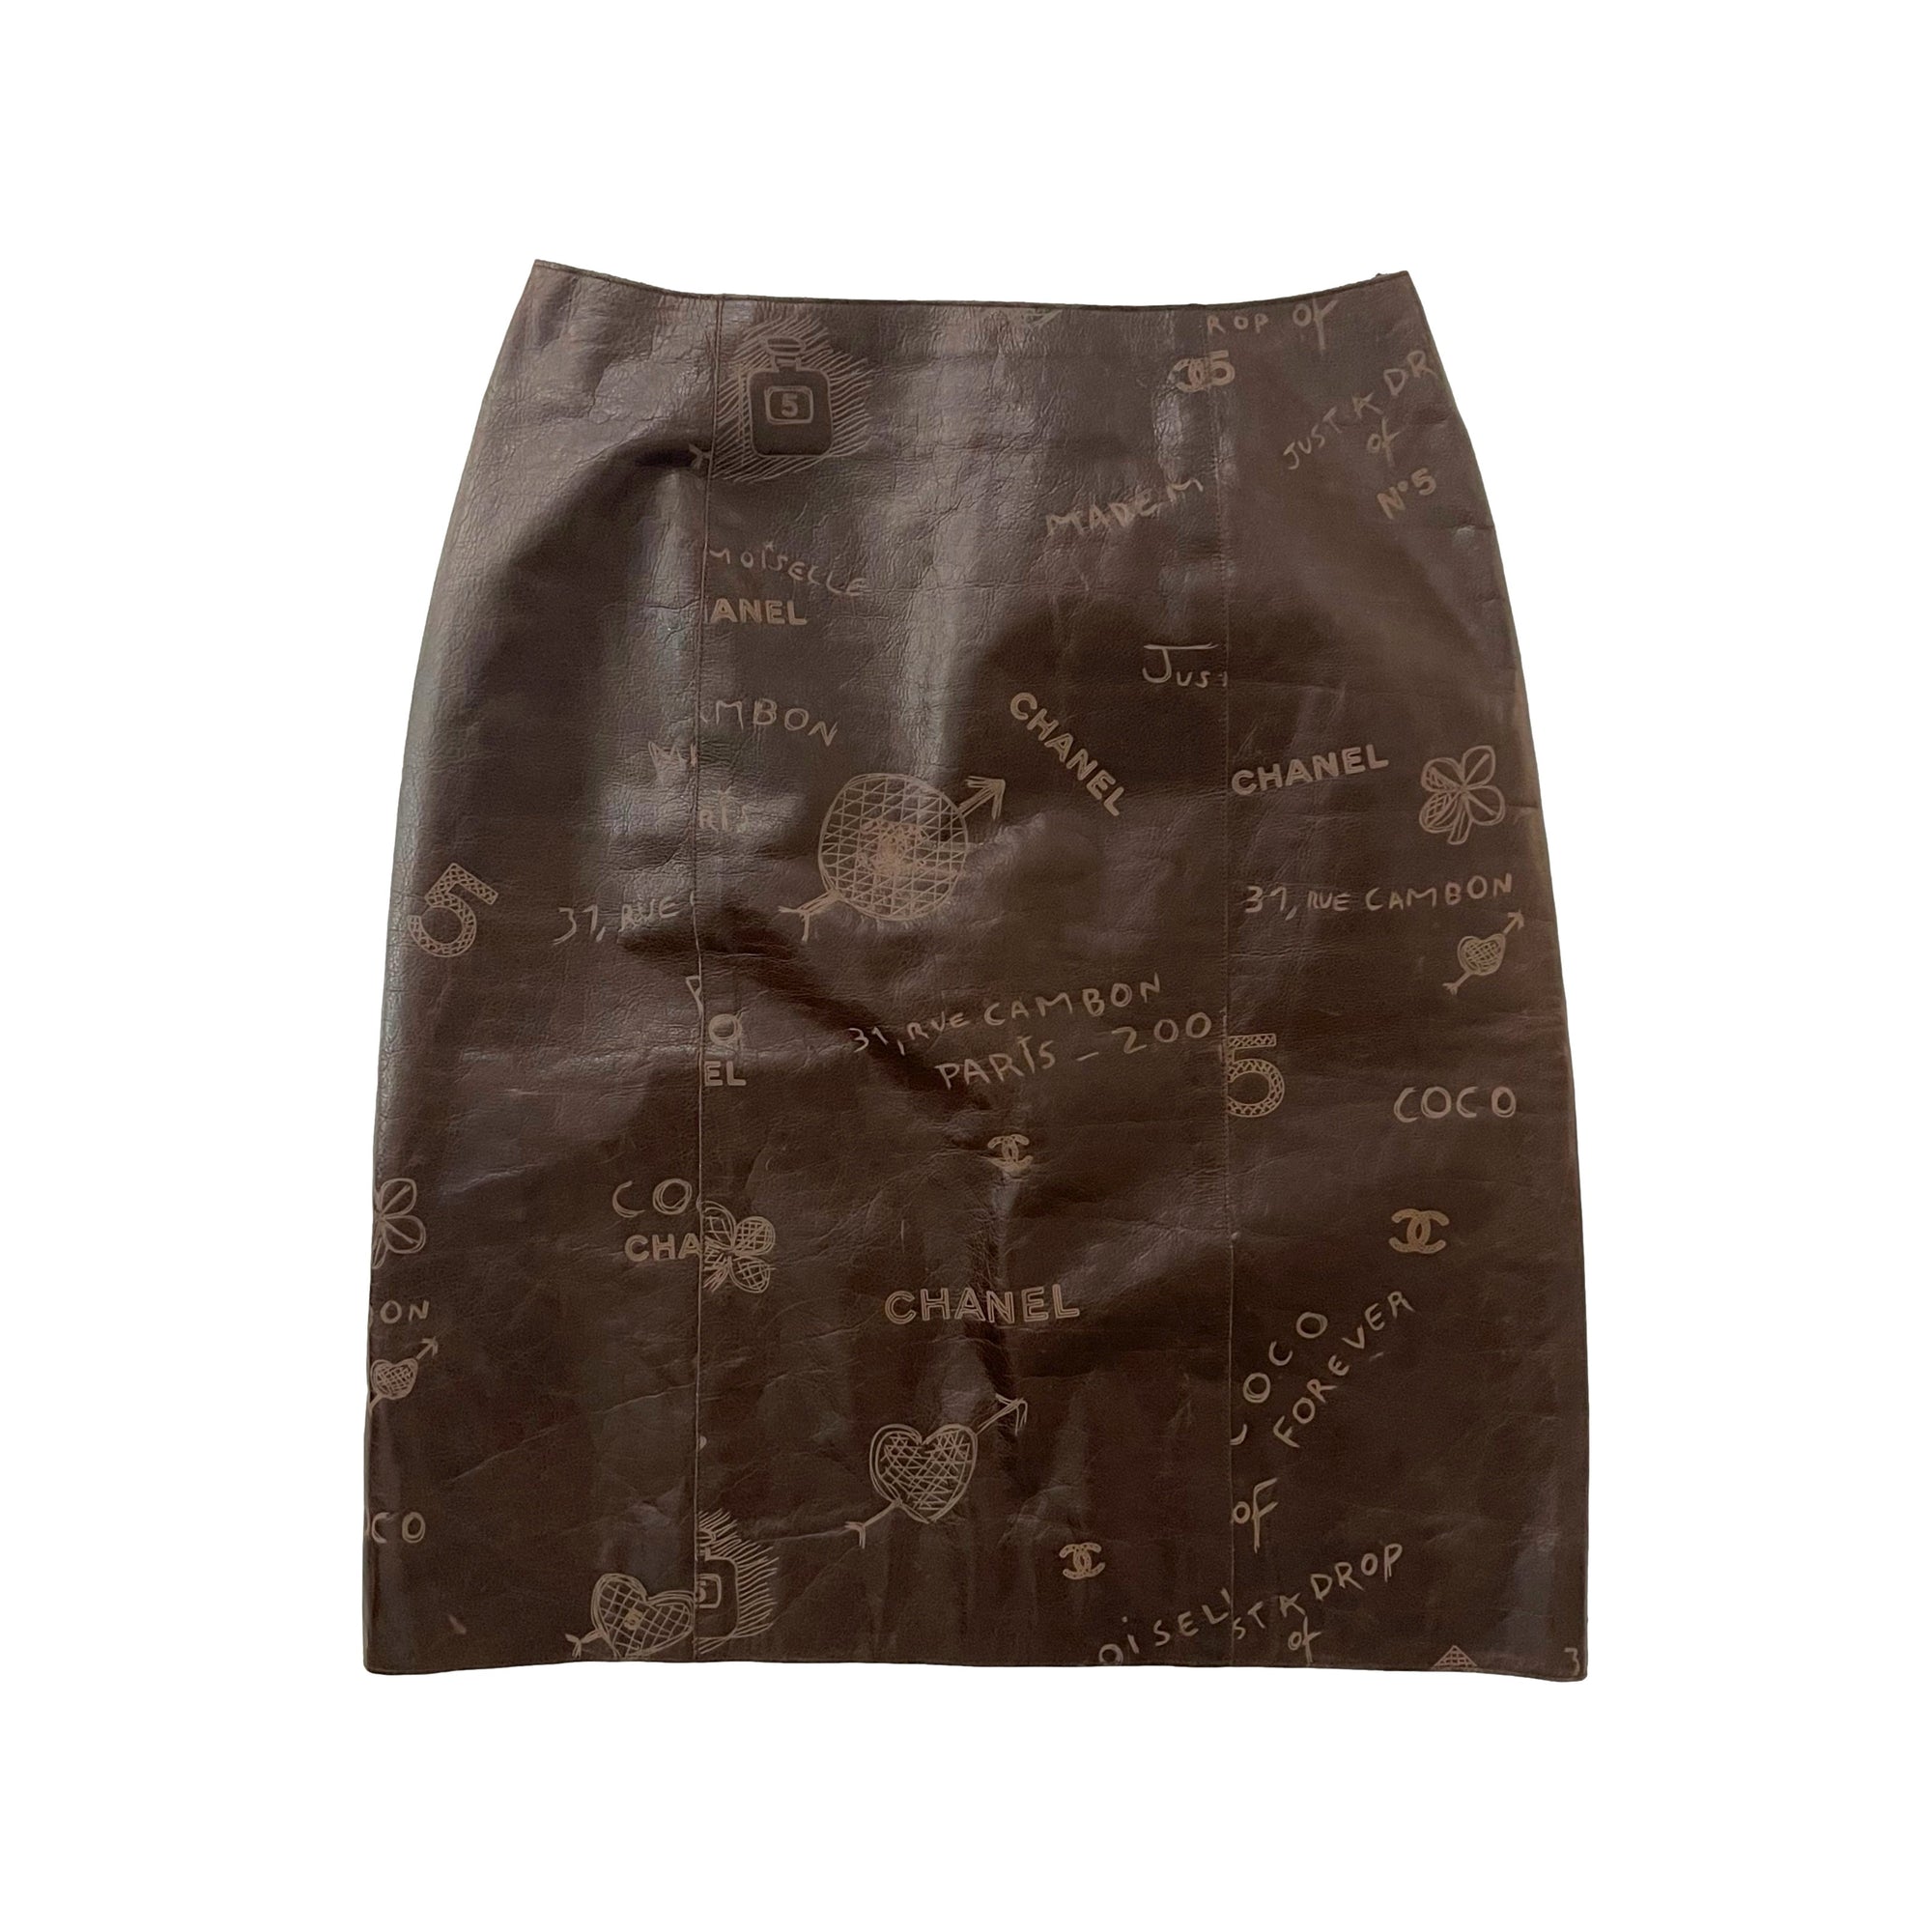 Chanel Dark Brown Leather Etched Skirt - Apparel